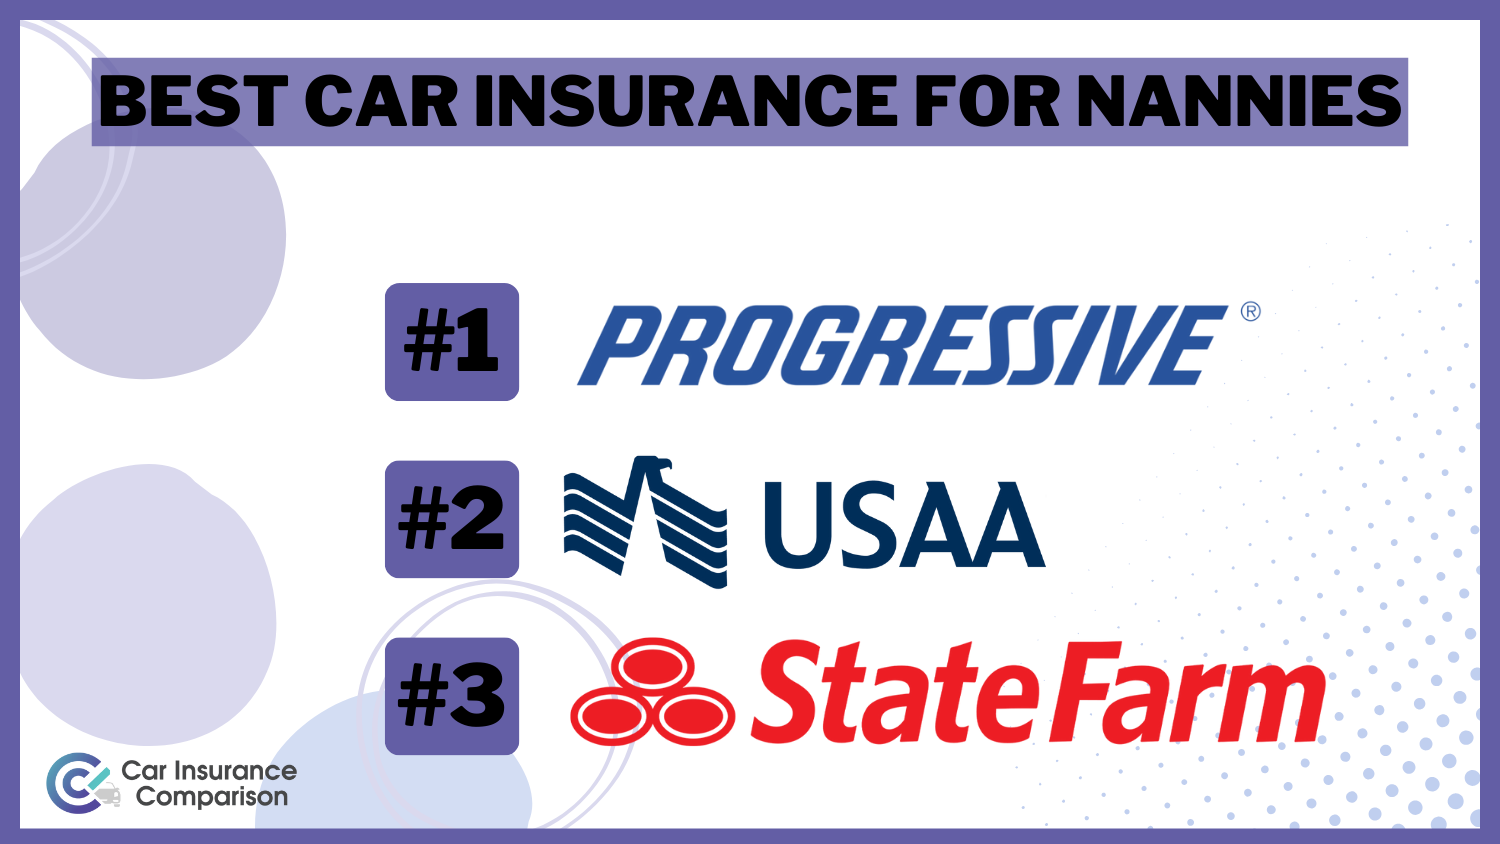 Progressive, USAA and State Farm: Best Car Insurance for Nannies